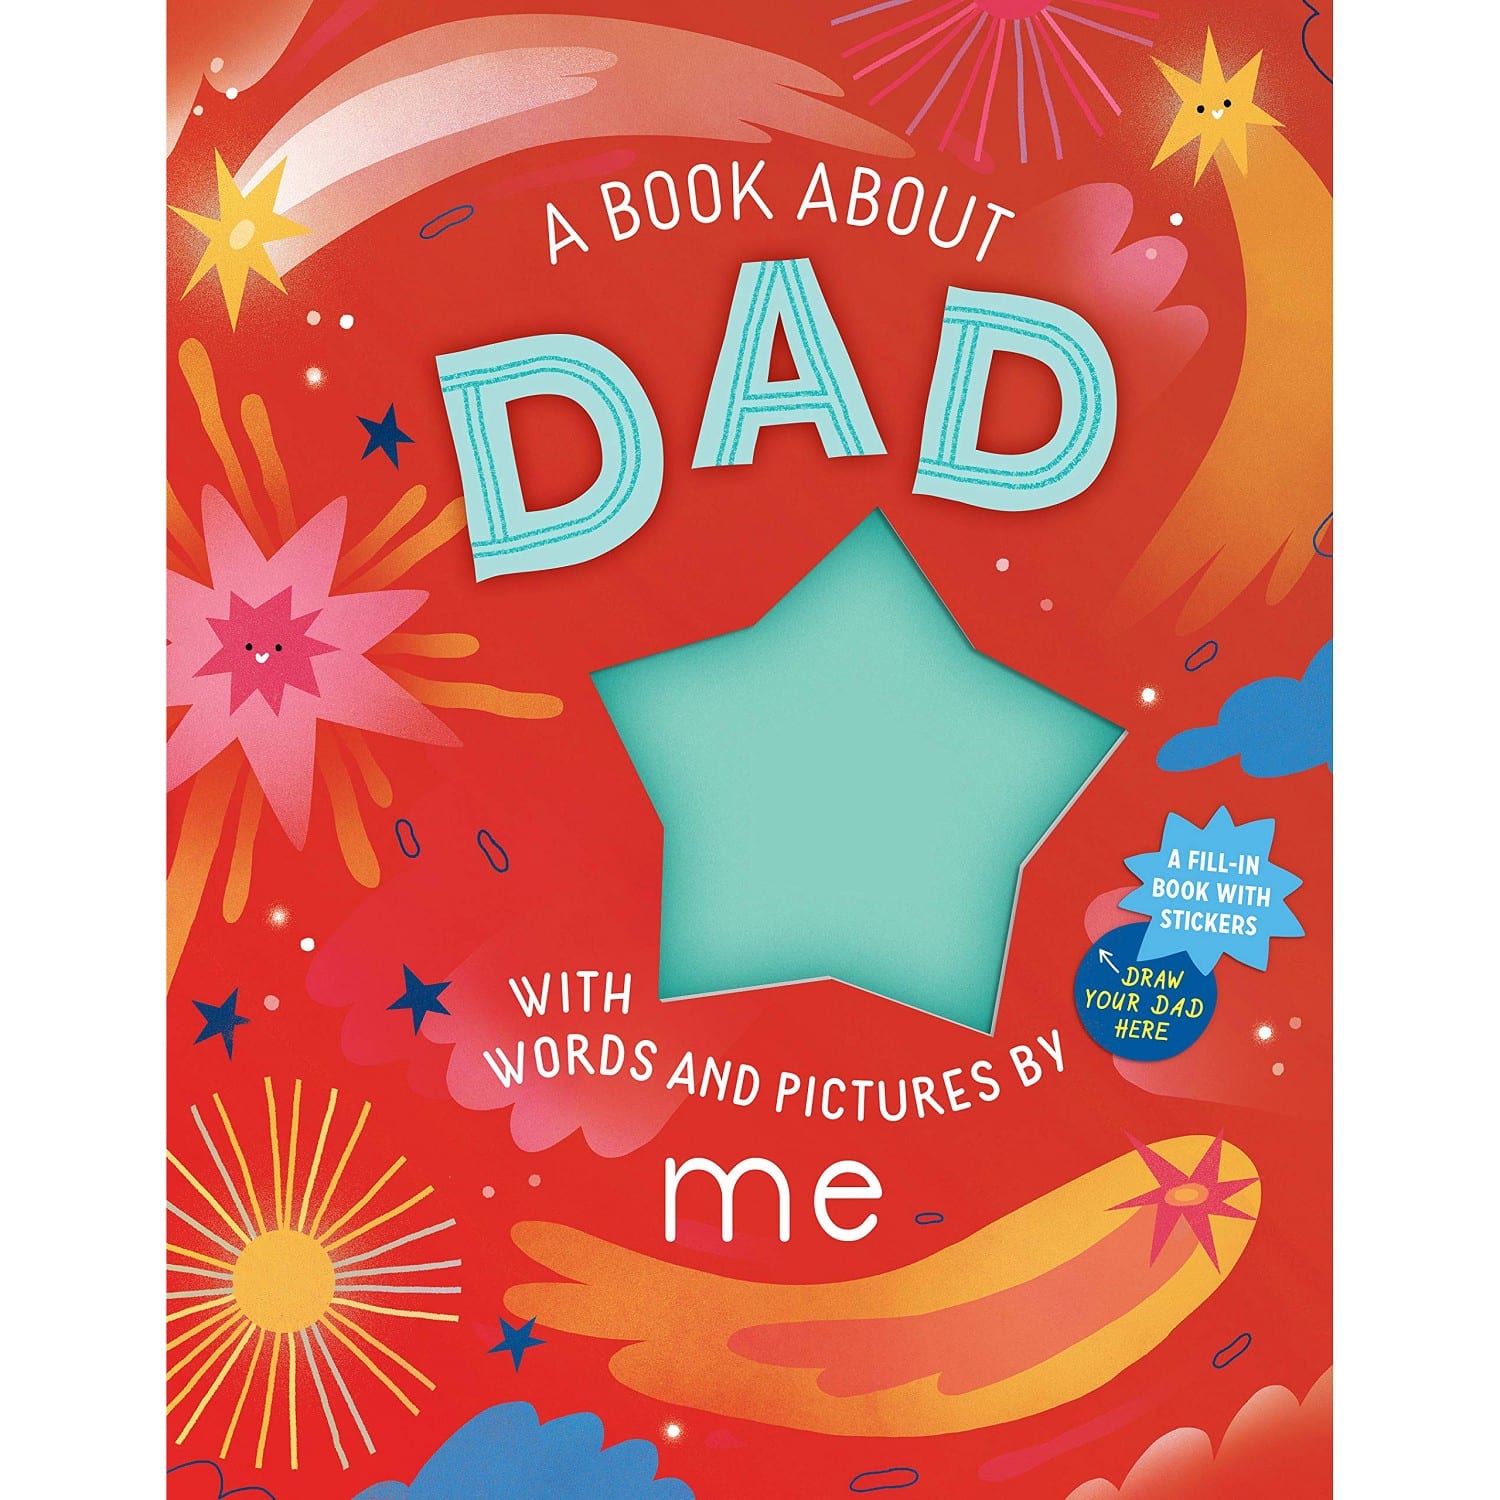 A Book About Dad With Words and Pictures By Me